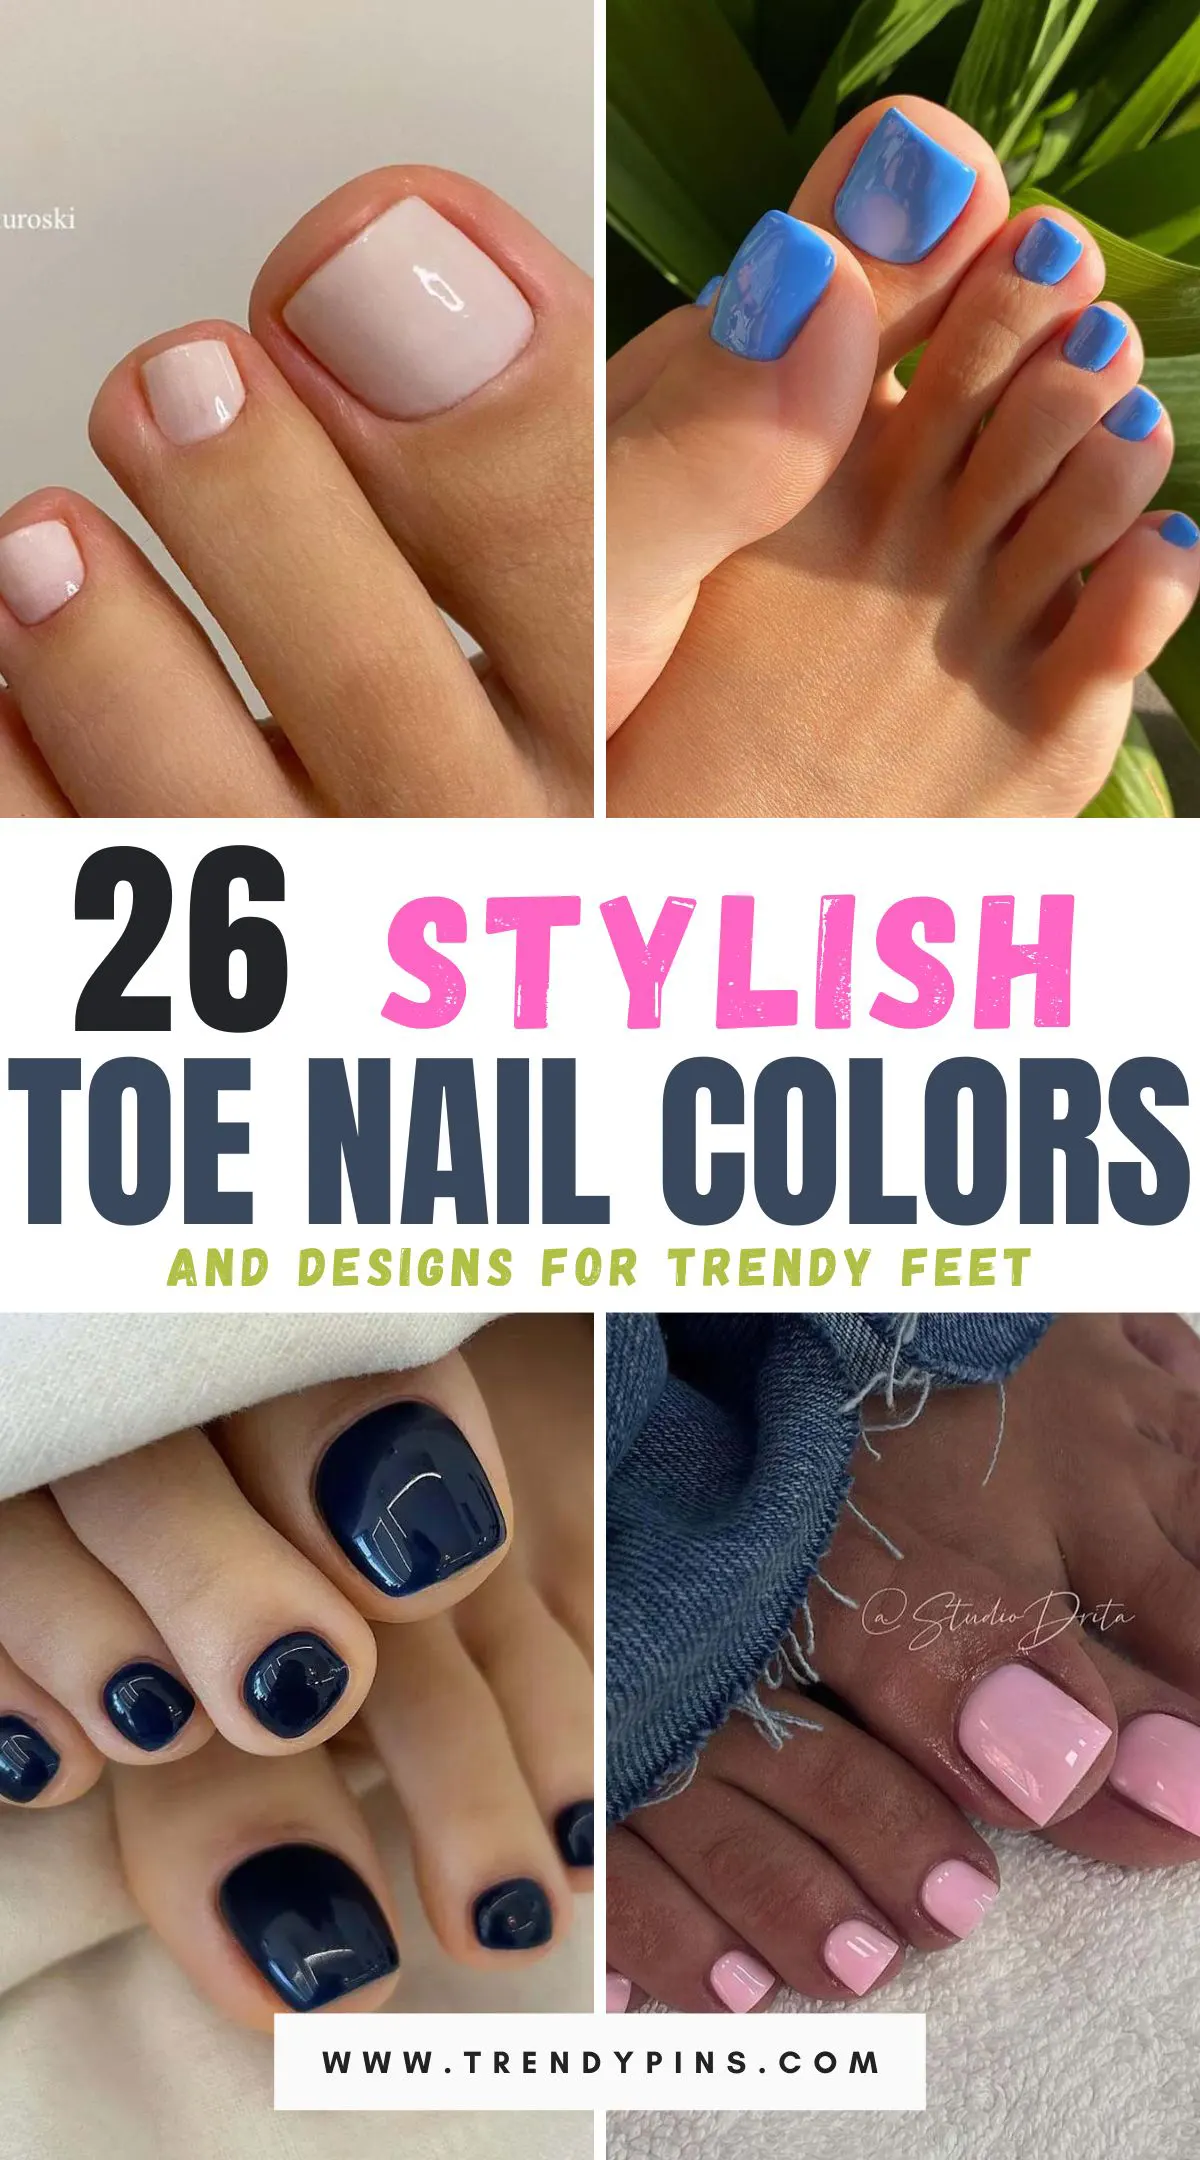 Elevate your pedicure game with our roundup of the 26 trendiest toe nail colors and designs. Discover the latest hues, from bold neons to subtle pastels, and intricate patterns that will keep your toes looking chic all season. Ready to step into style? Dive in for inspiration and tips!